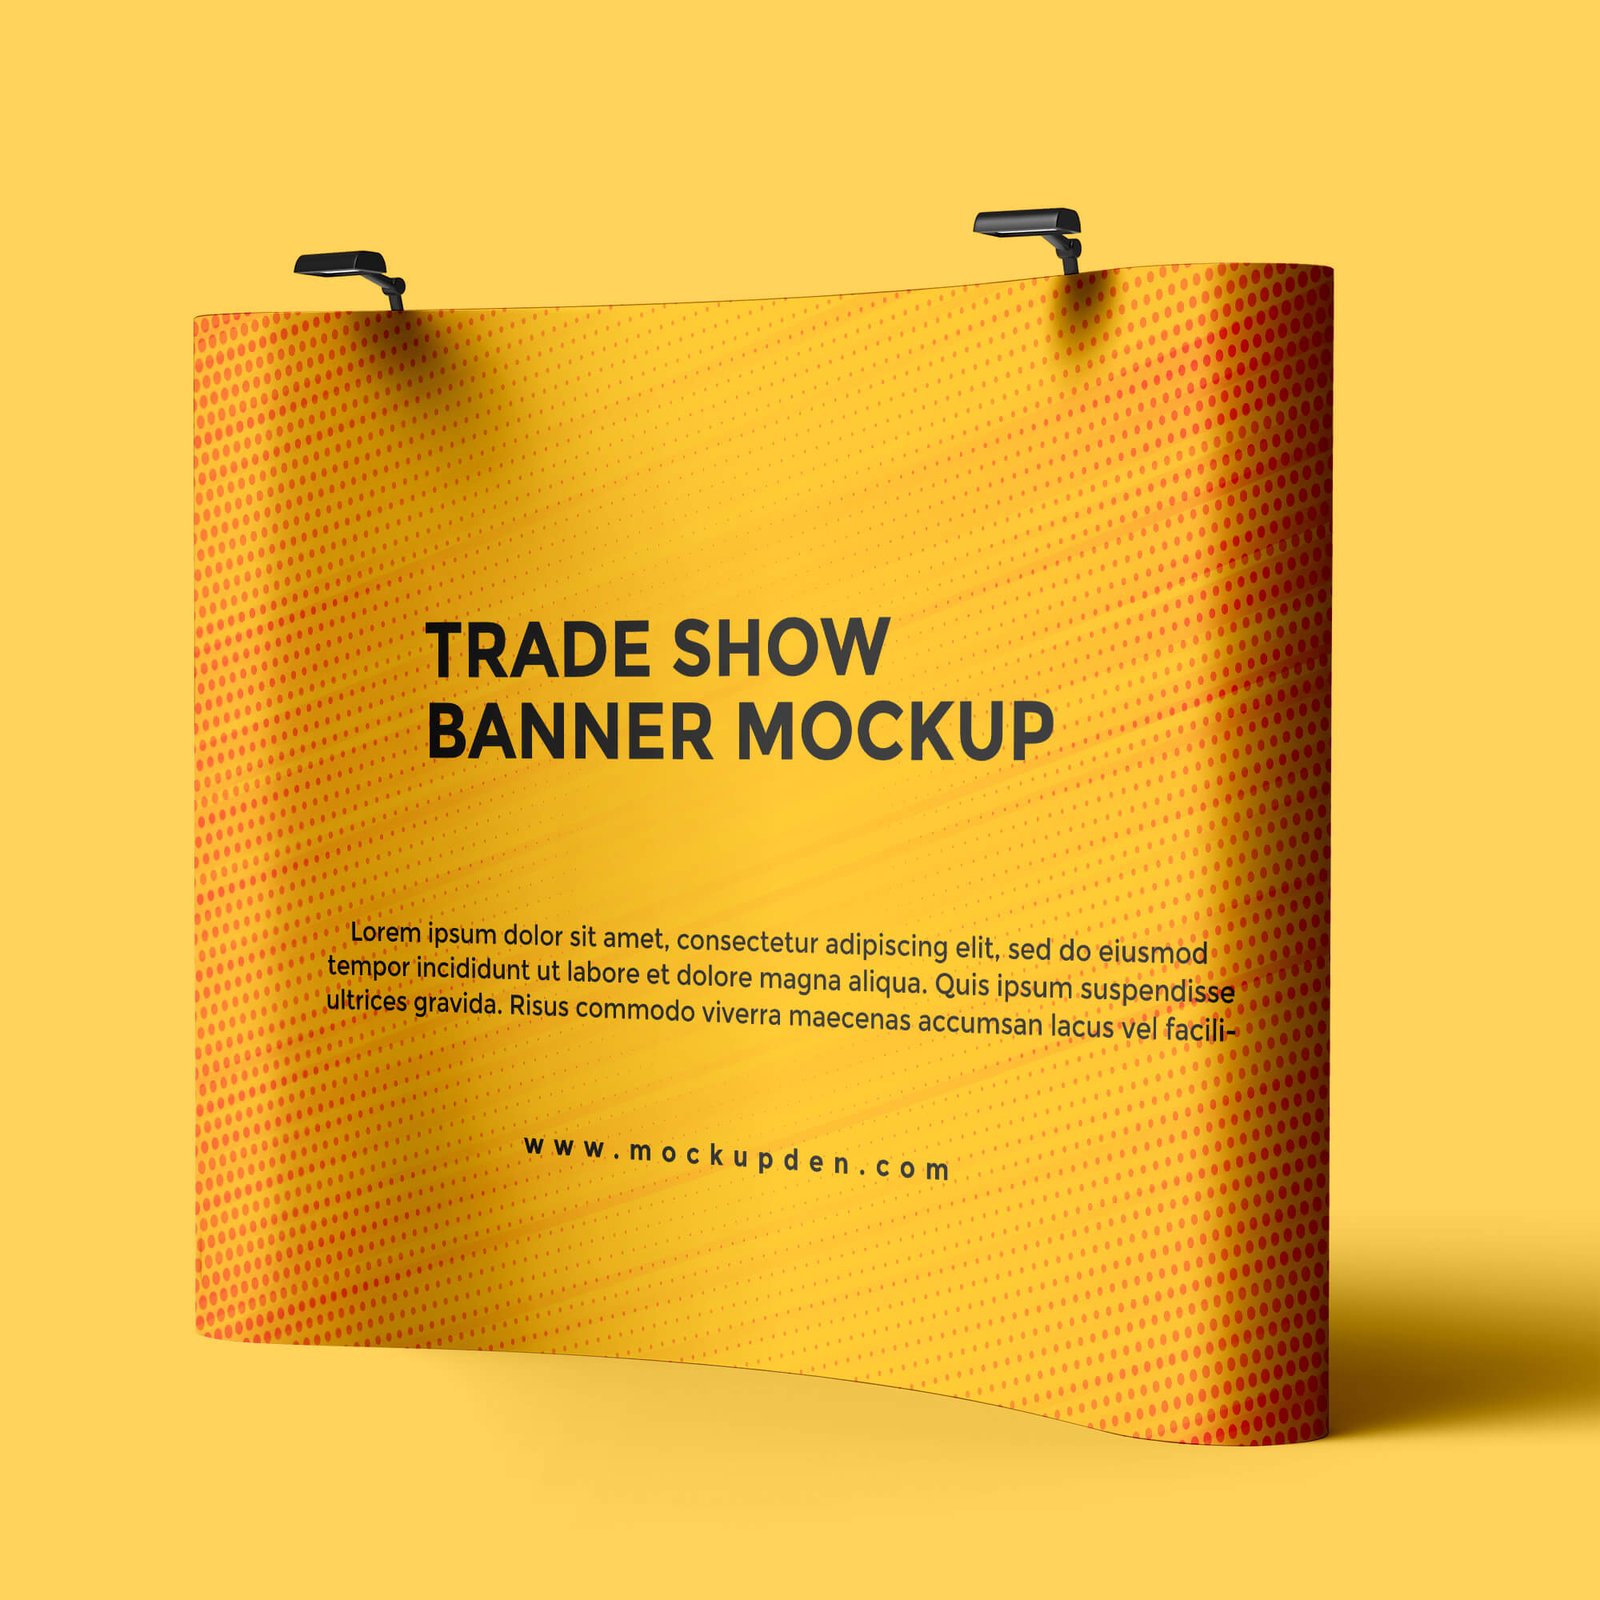 Free Trade Show Banner Mockup PSD Template